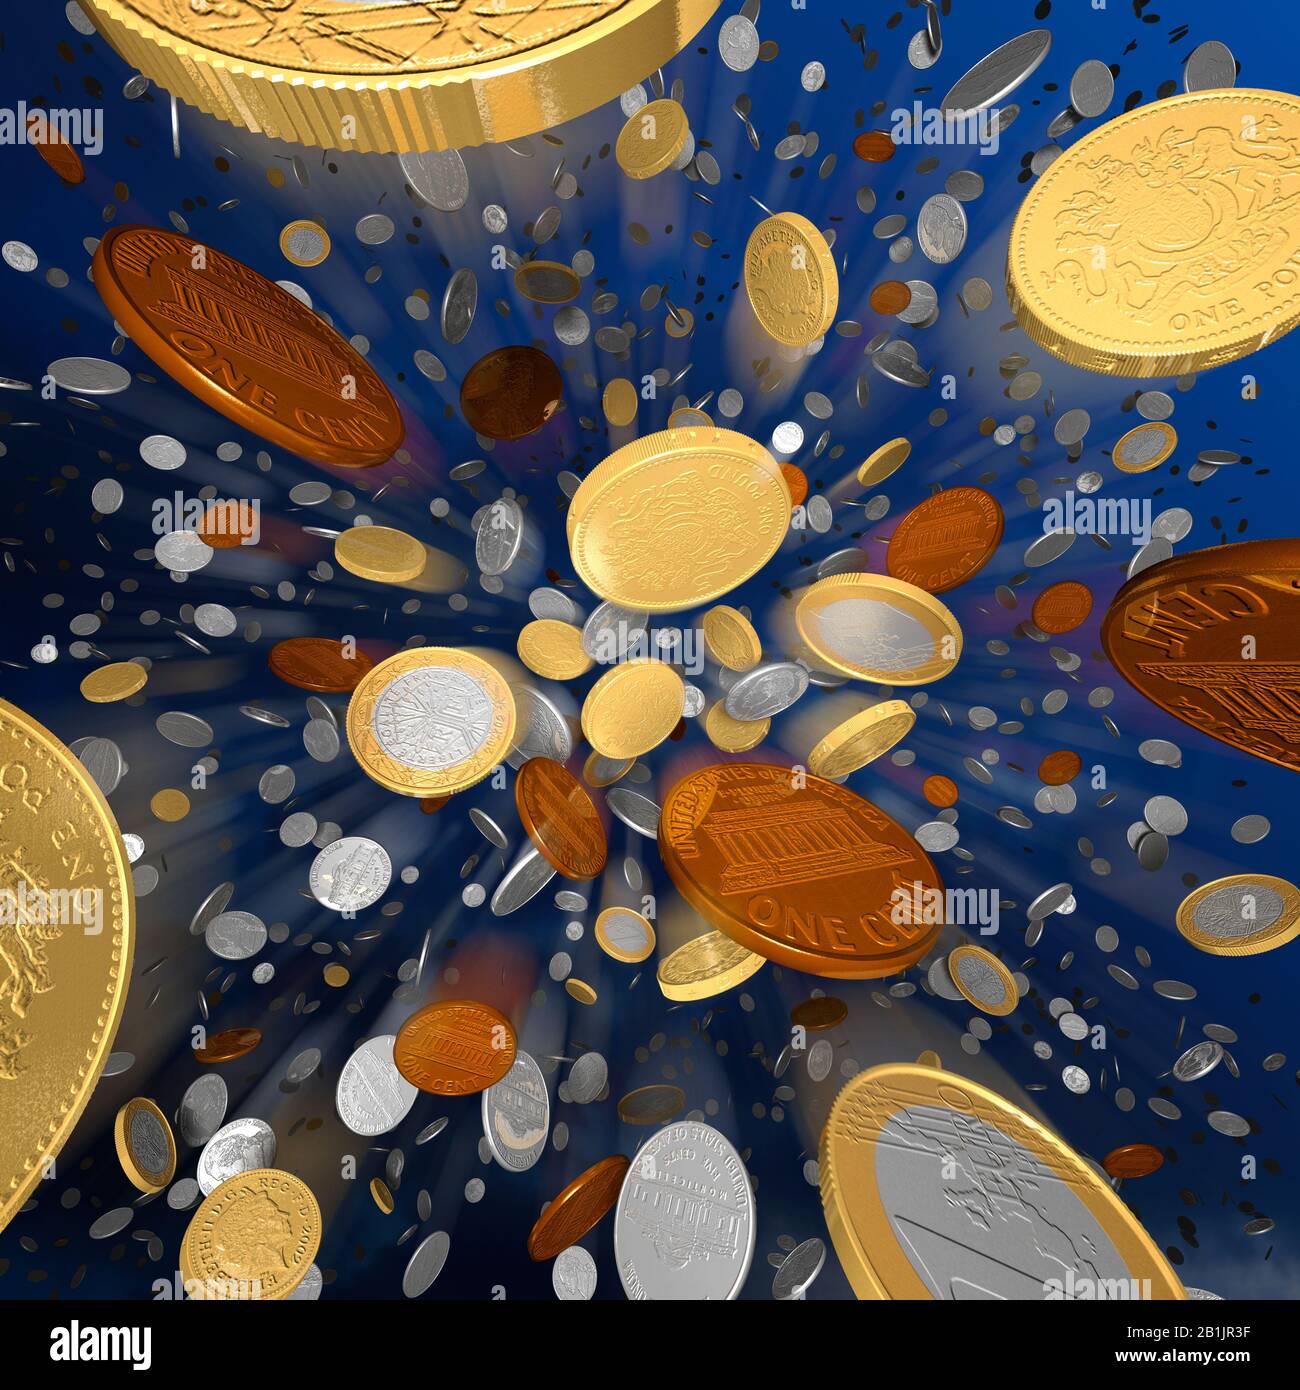 Pennies from heaven. Coins falling from the sky. International currencies. Stock Photo